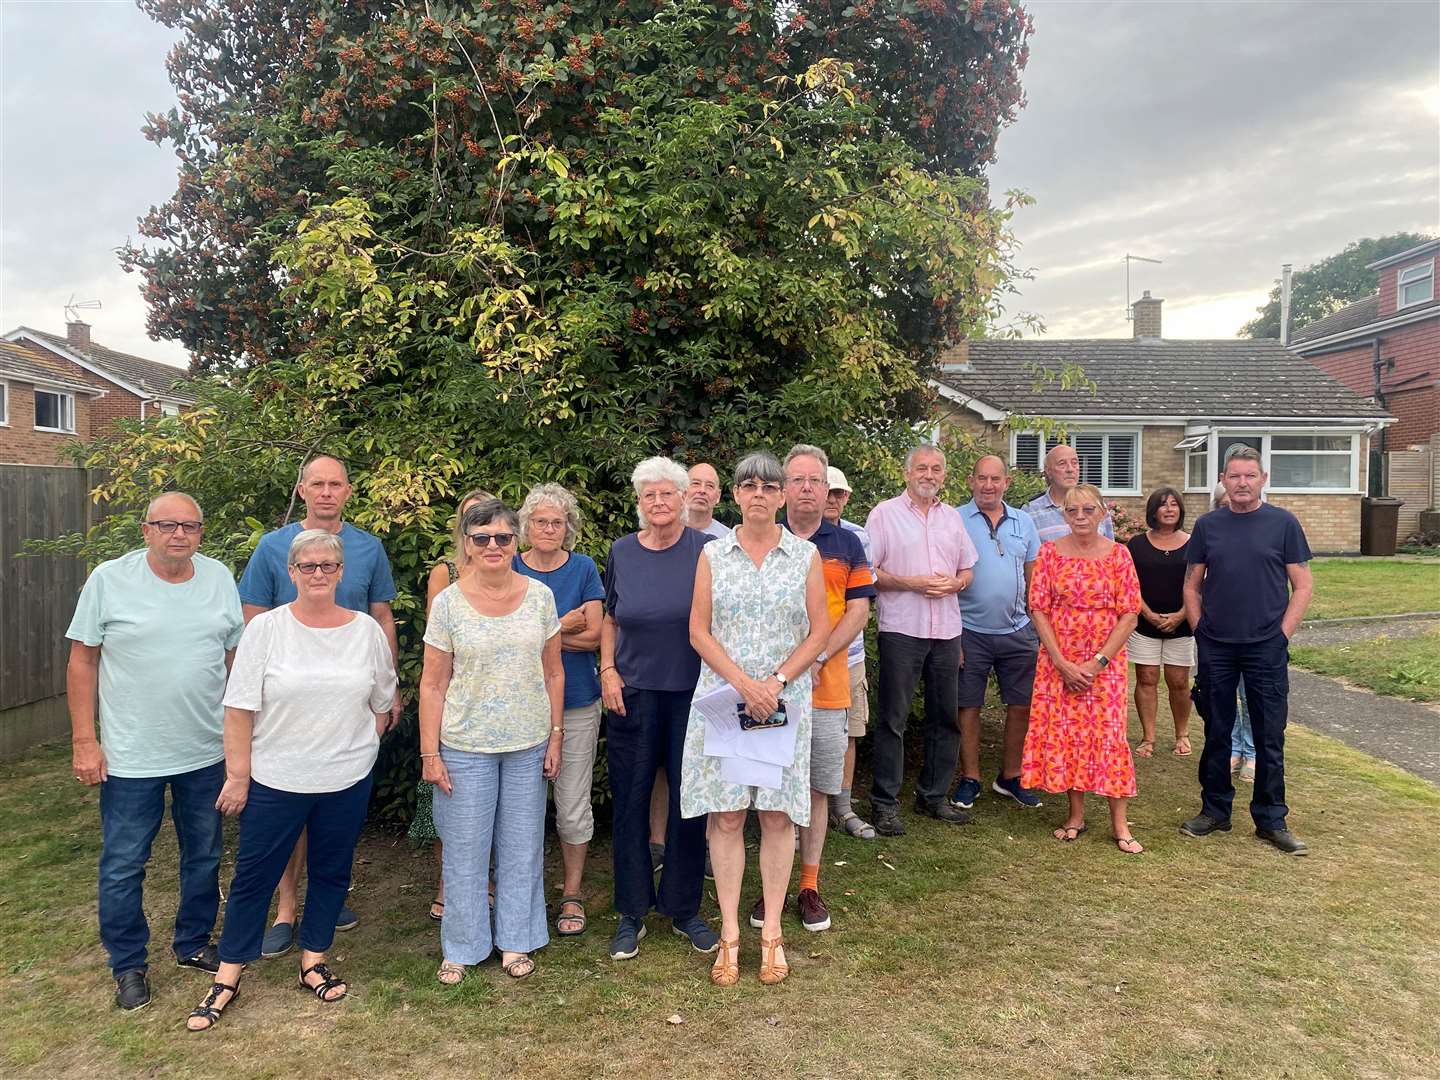 Residents of Johnson Court, Faversham, have hit out at plans put forward by a developer to build a bungalow on a green space in their cul-de-sac